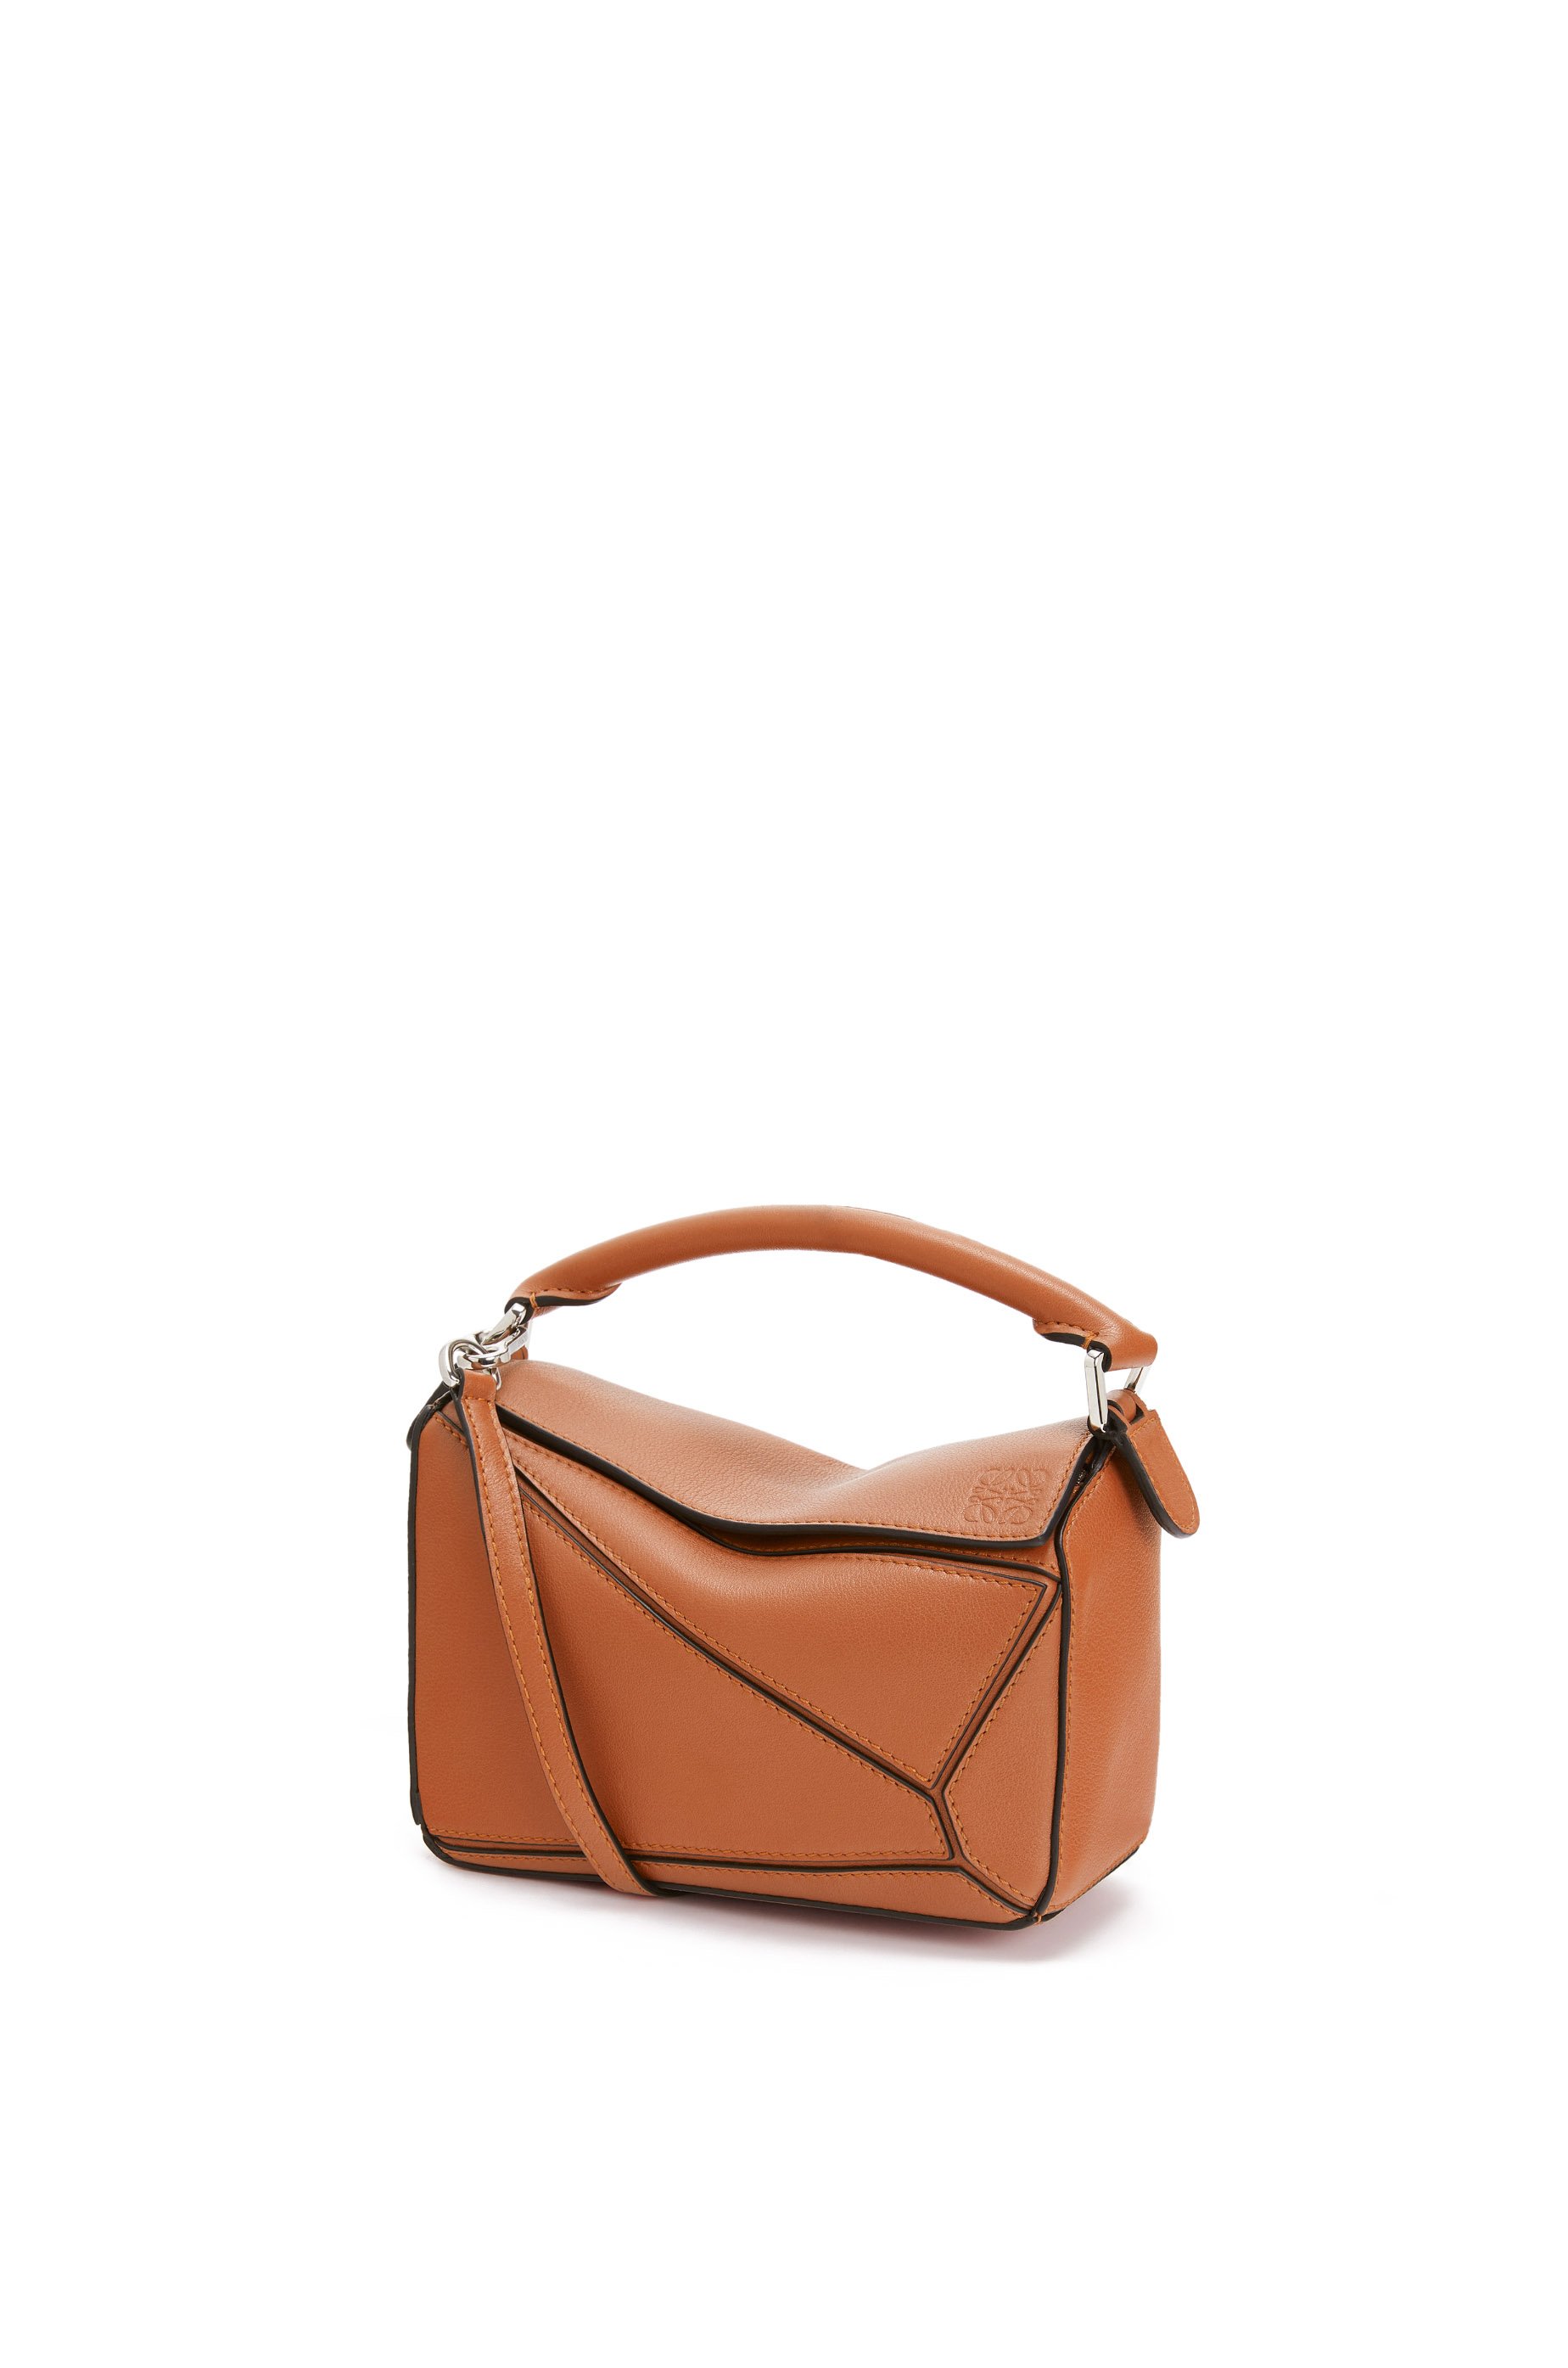 loewe puzzle bag small price Off 60% - www.gmcanantnag.net